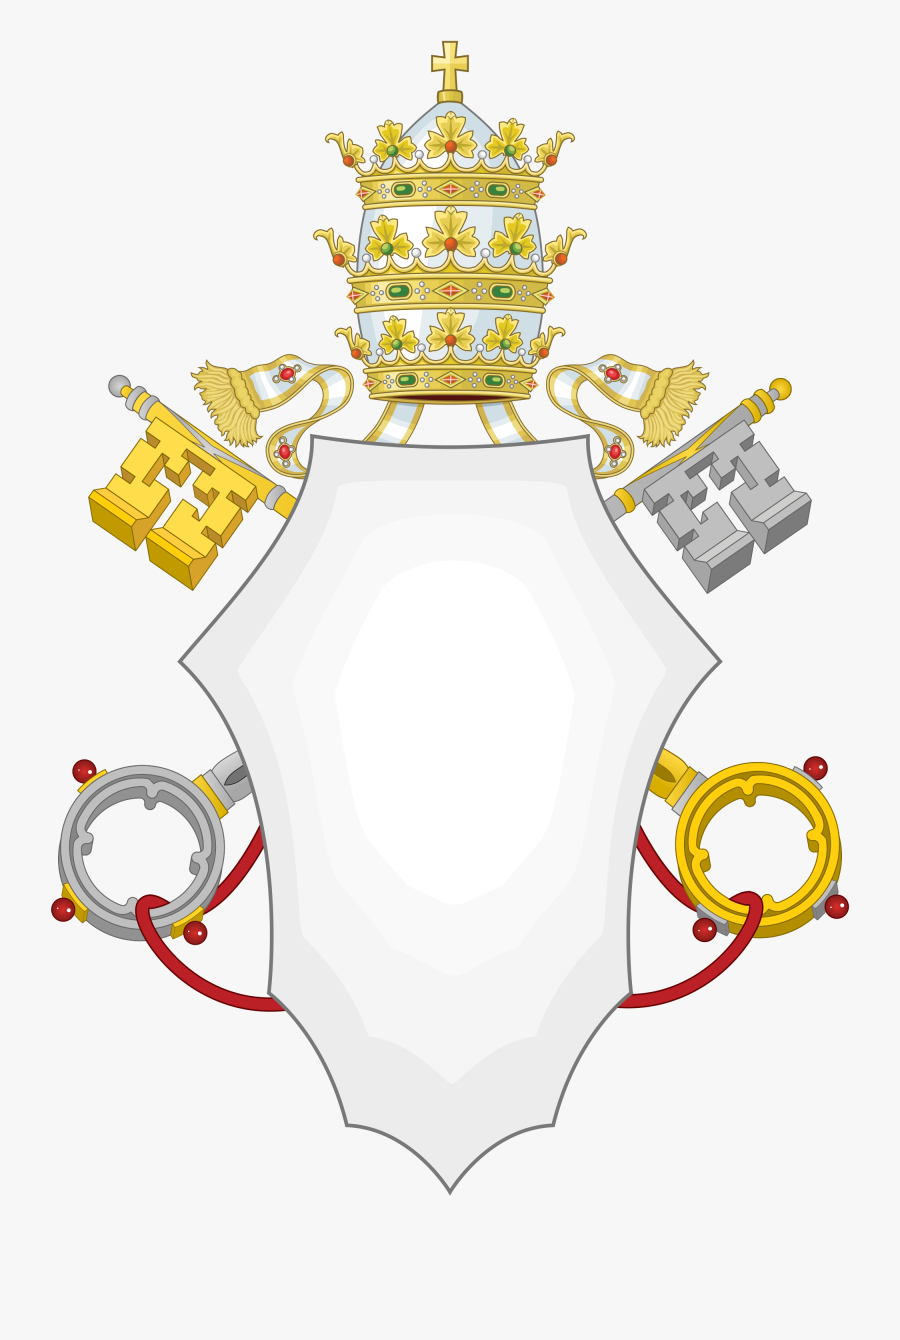 Papal Coat Of Arms Template, Transparent Clipart